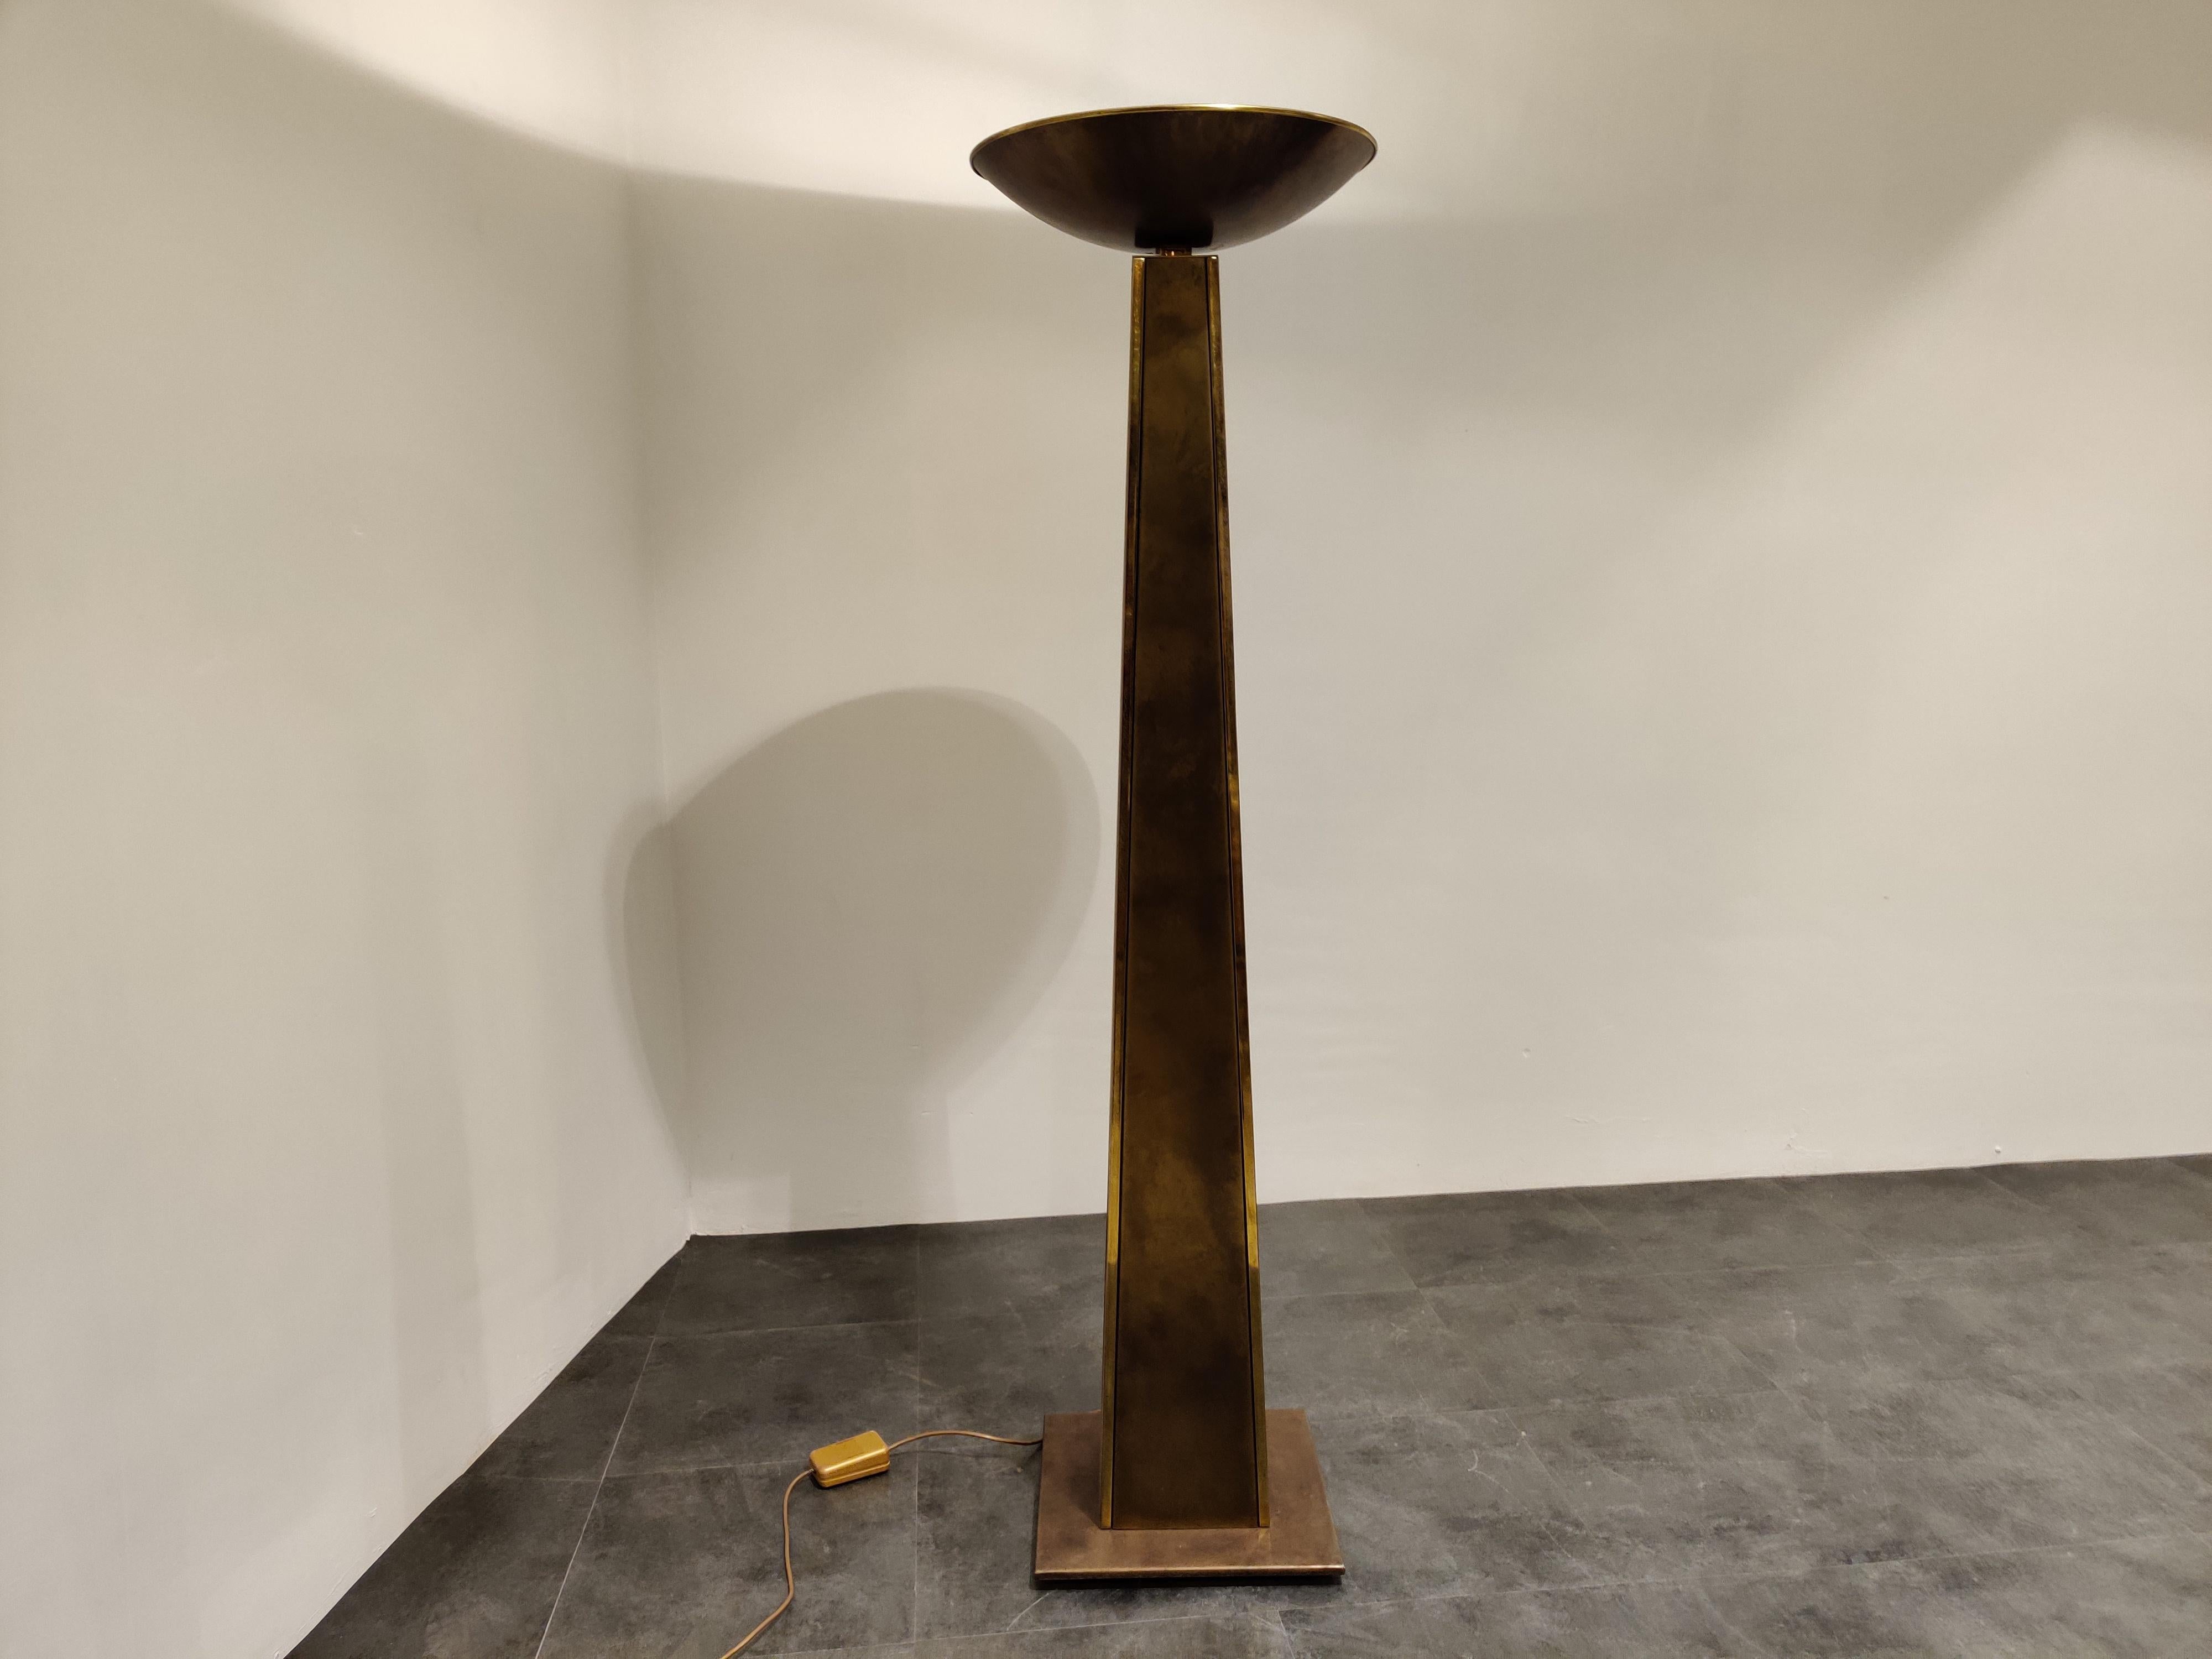 Large conical 'torchiere' floor lamp made from brass.

This uplighter floor lamp is dimmable.

Tested and ready to be used.

Beautiful statement piece.

Produced by Belgochrom in the late seventies, early eighties.

Measures: Height